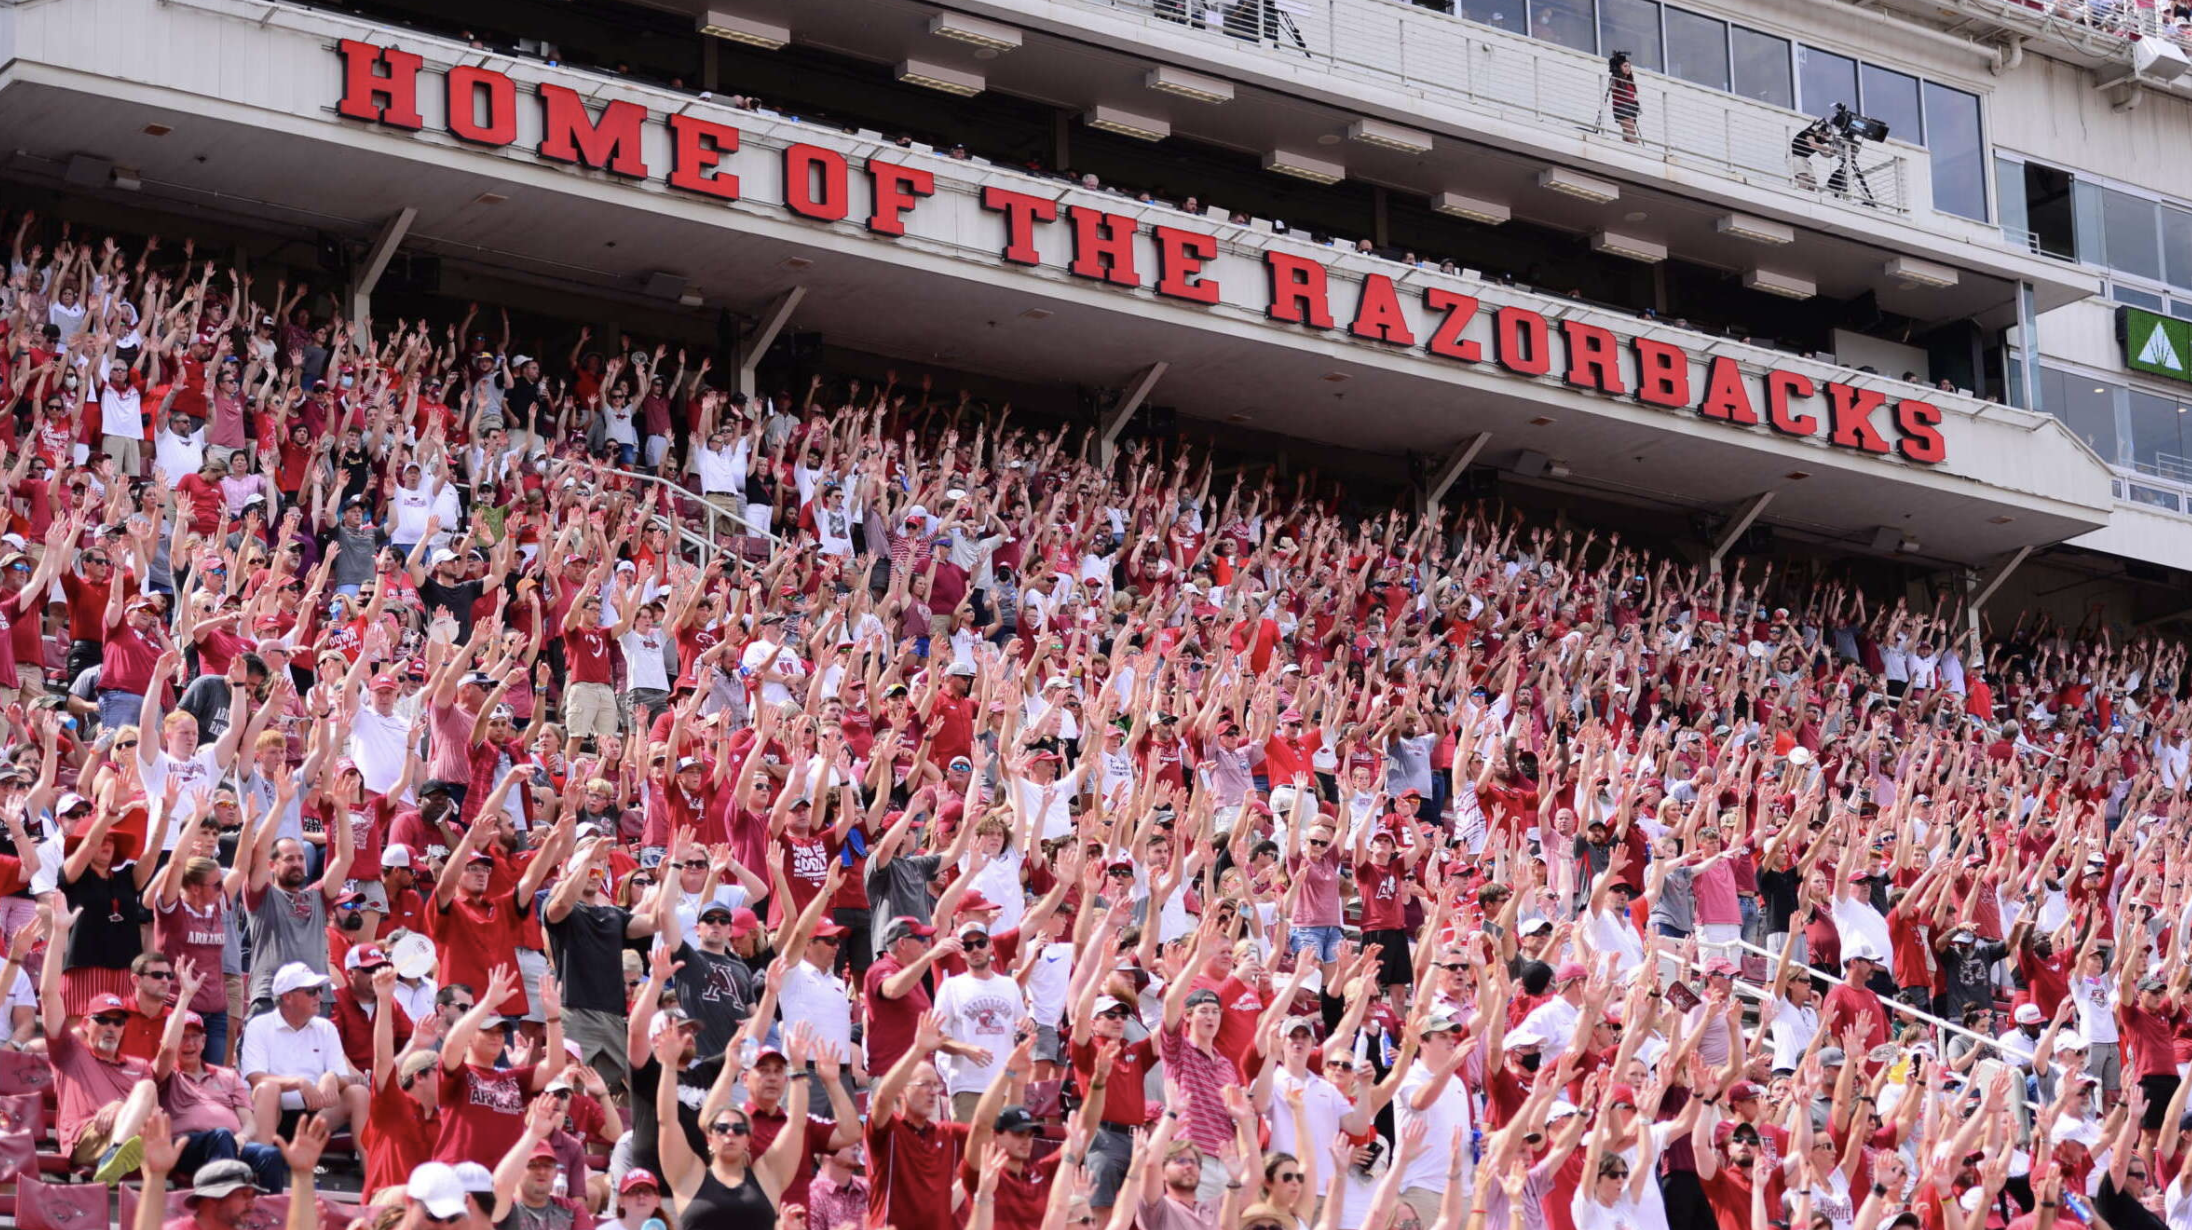 All seats sold for Arkansas vs. Texas this weekend in Fayetteville